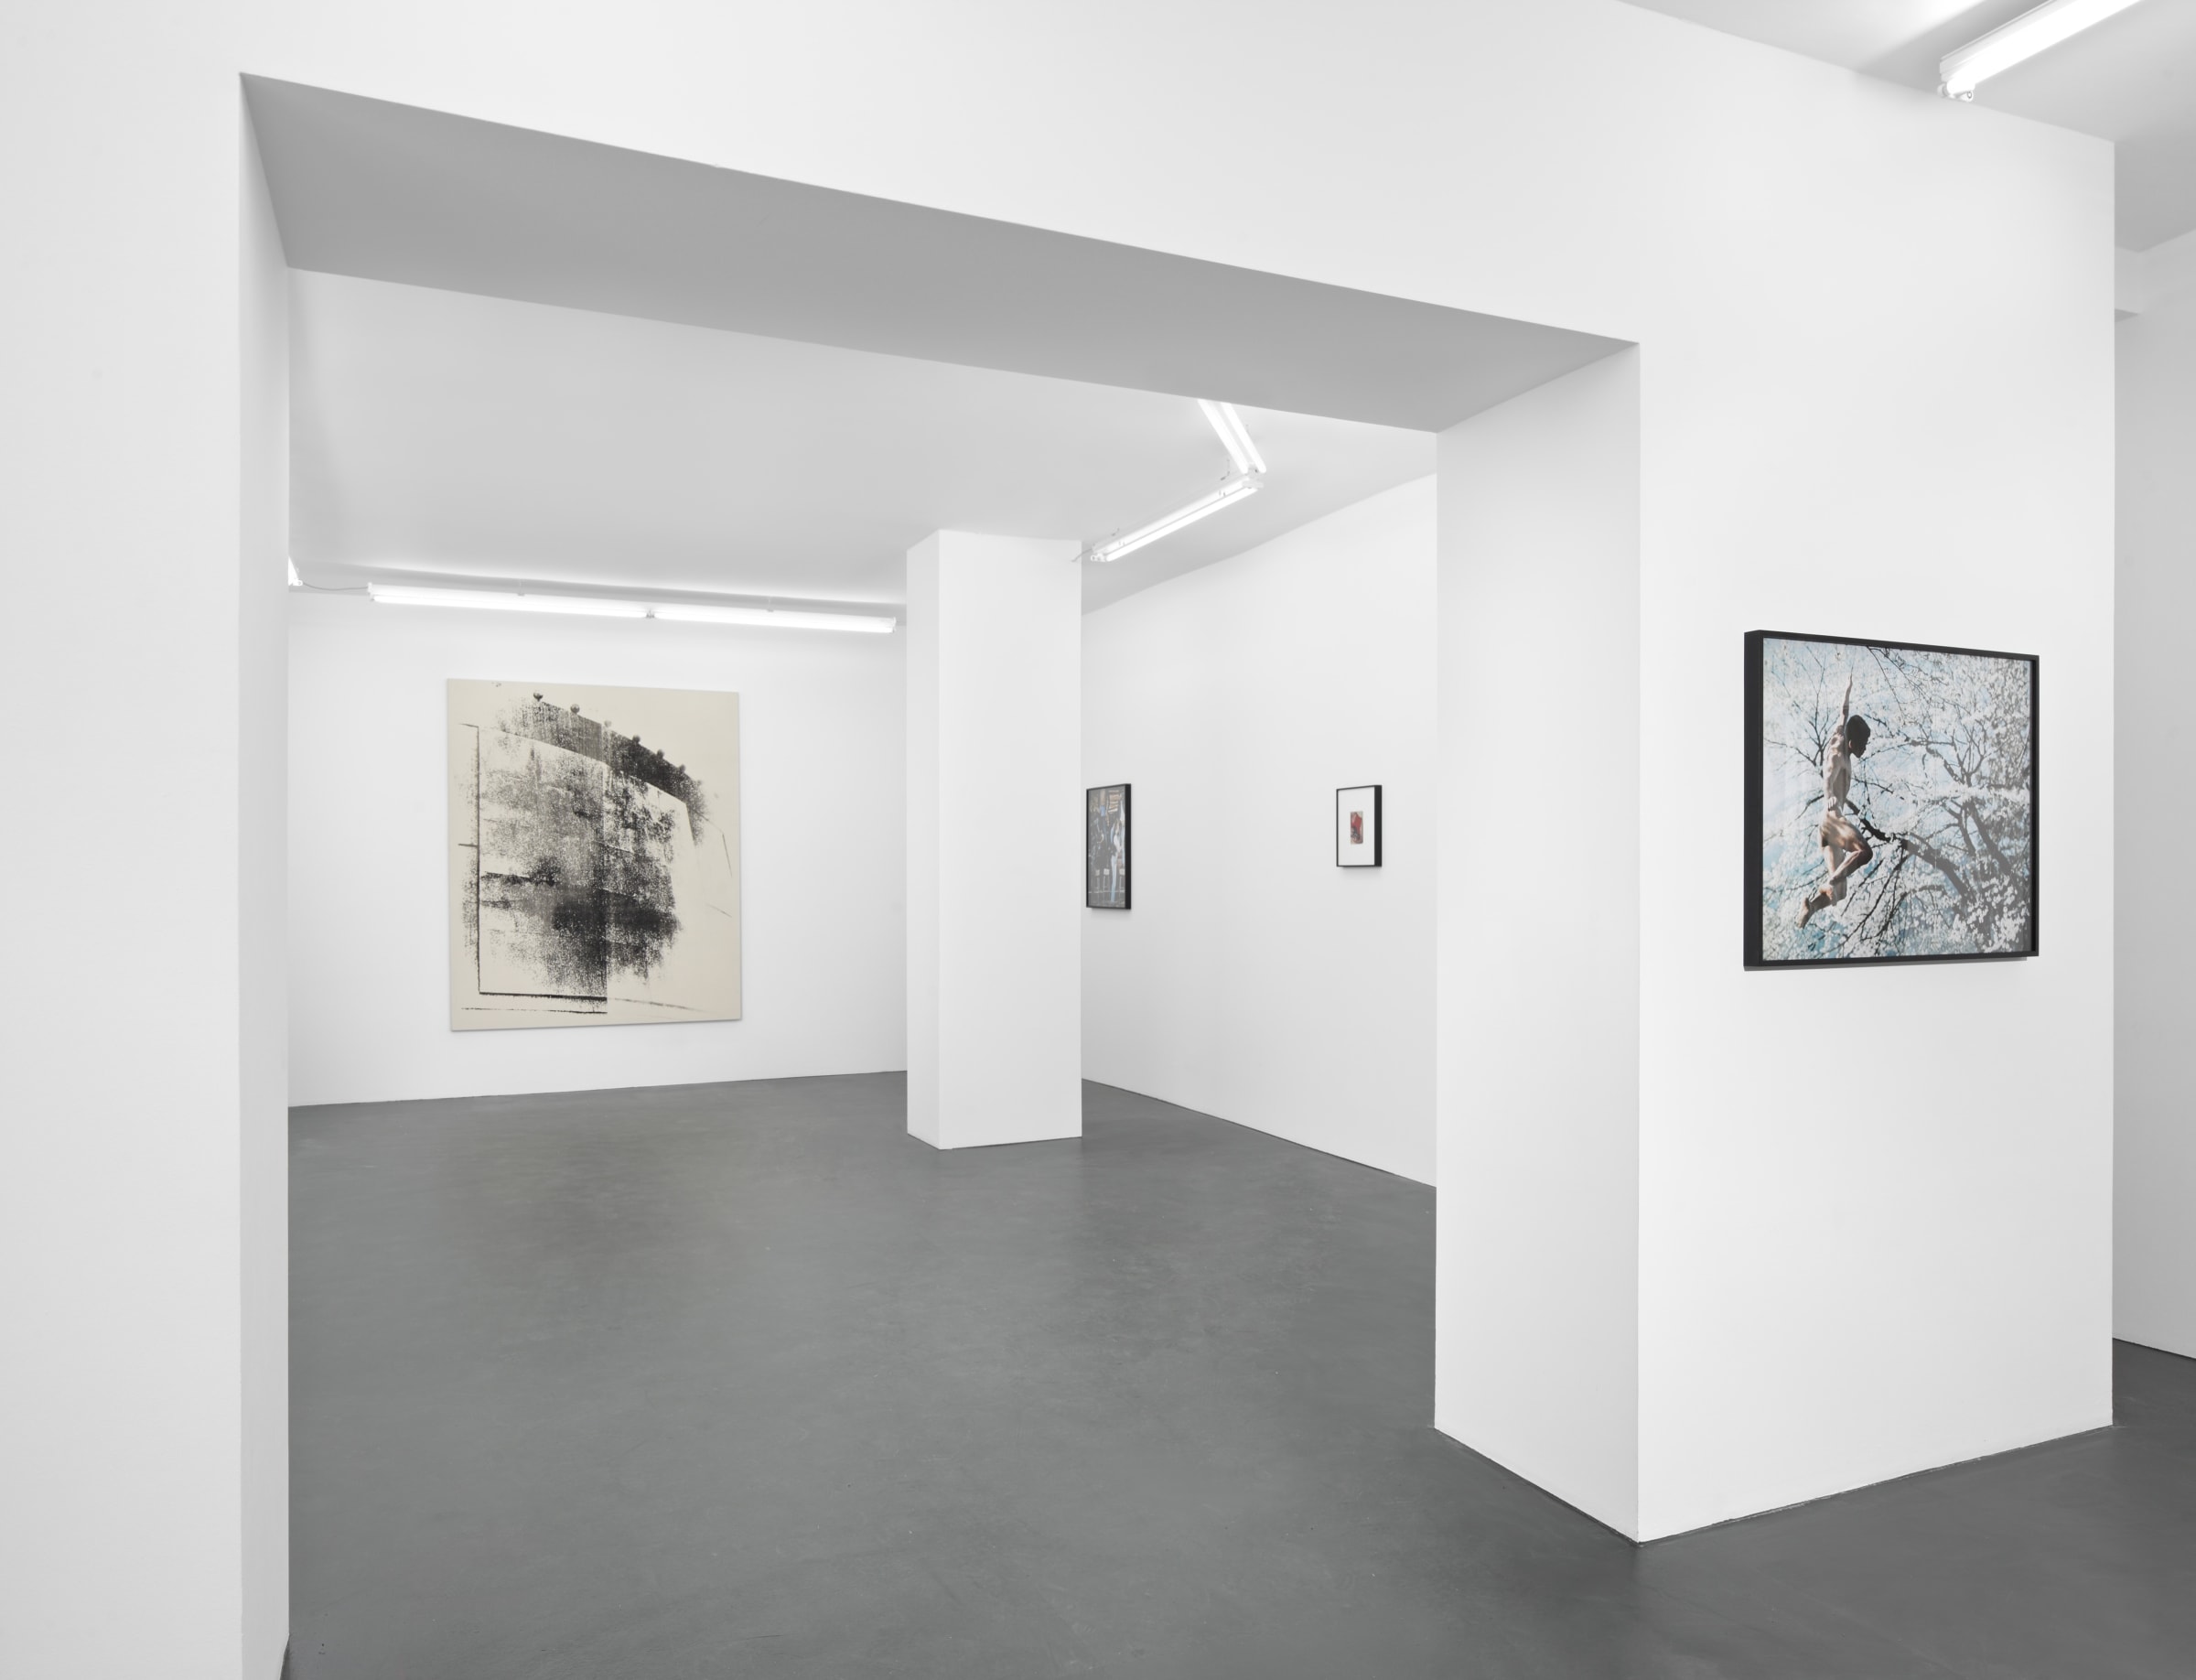 Dean Sameshima Cruise or be Cruised Installation View April 29 - June 25, 2011 Peres Projects, Berlin